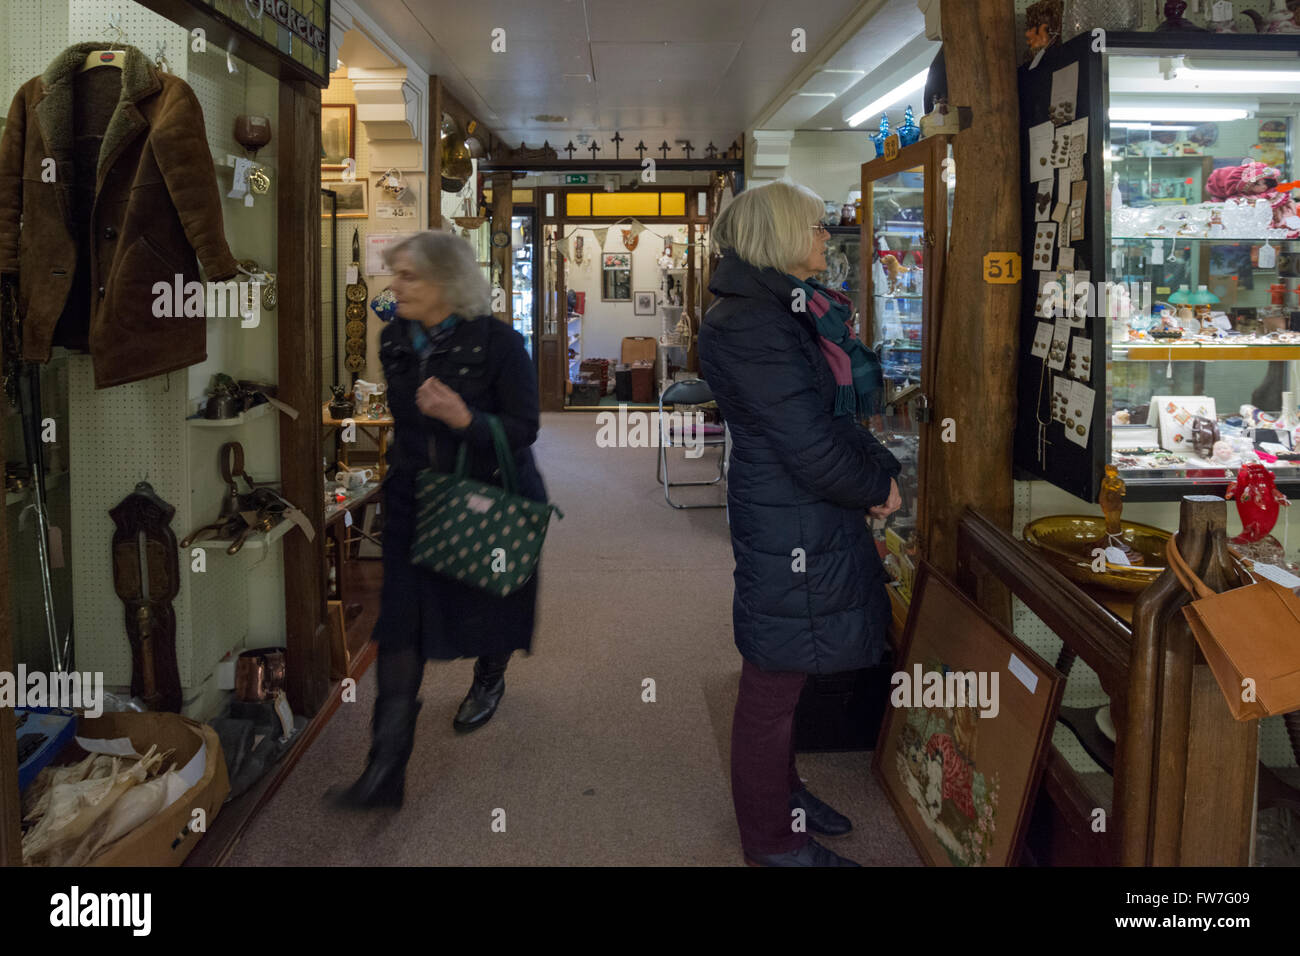 Customers in the Hungerford Arcade Antiques and Collectables, England, UK Stock Photo